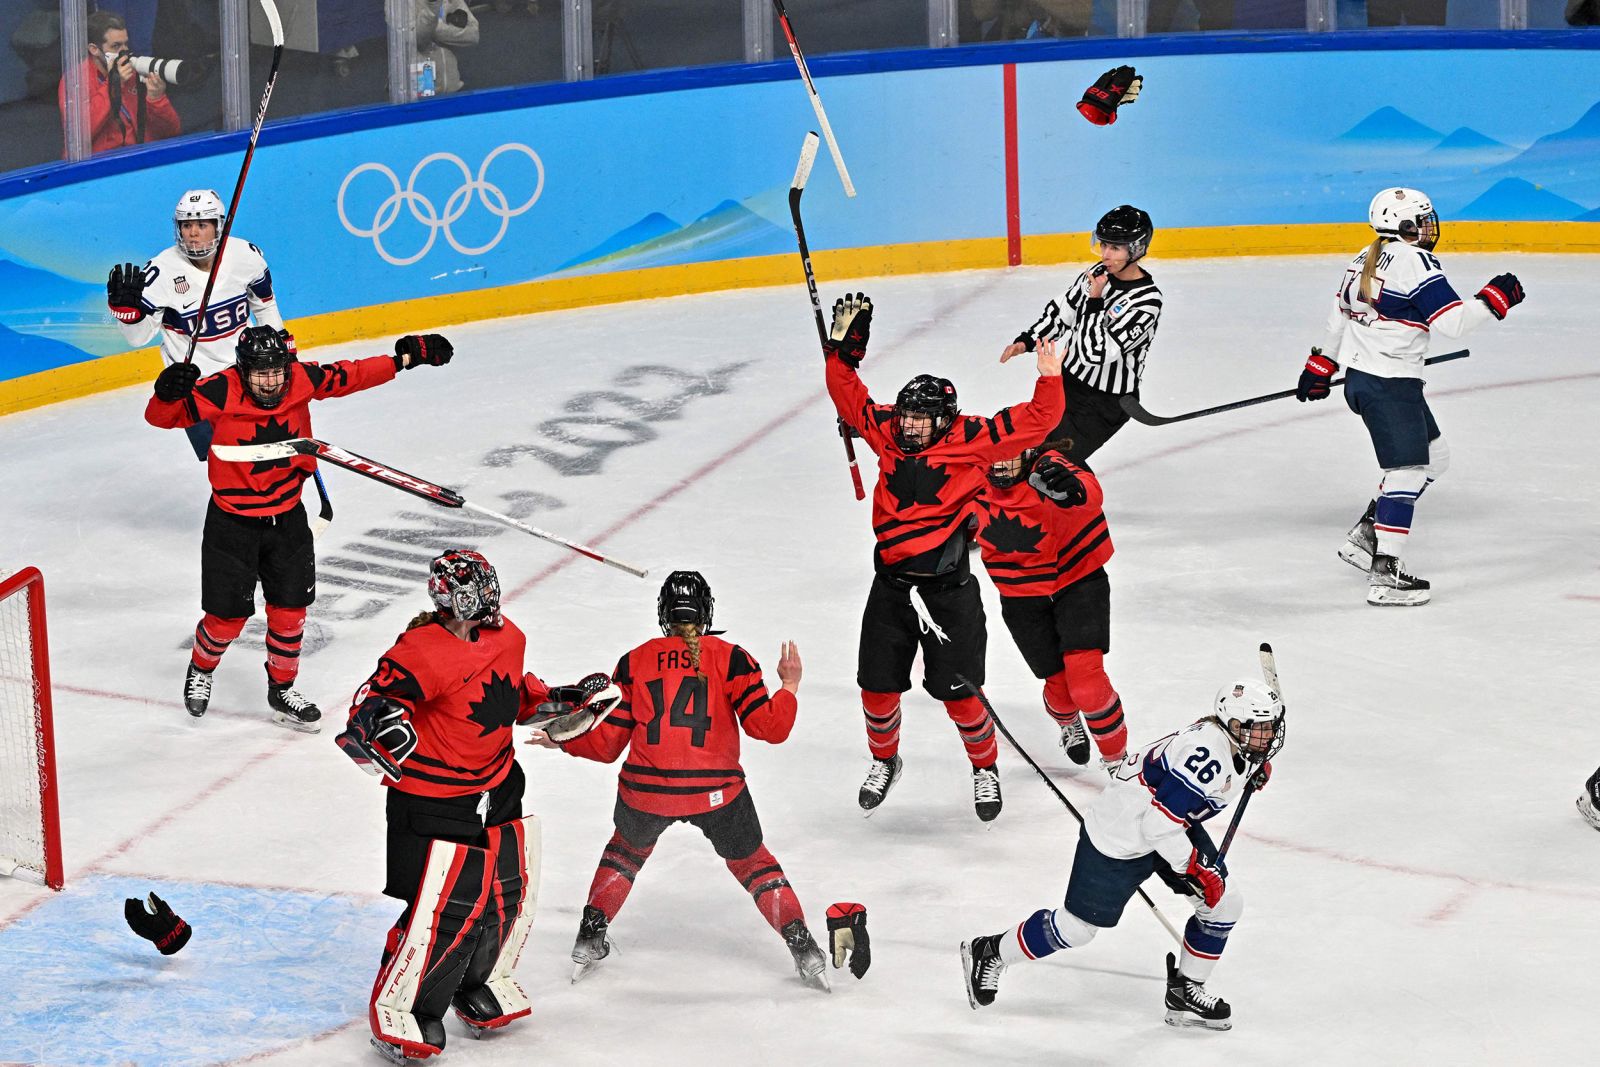 The Canadian women's hockey team celebrates after defeating the United States 3-2 in the gold-medal game on February 17. Since women's hockey became an Olympic sport in 1998, only Canada and the United States have won gold. The two countries have played in the gold-medal game in the last four Olympics, with Canada winning three of them.